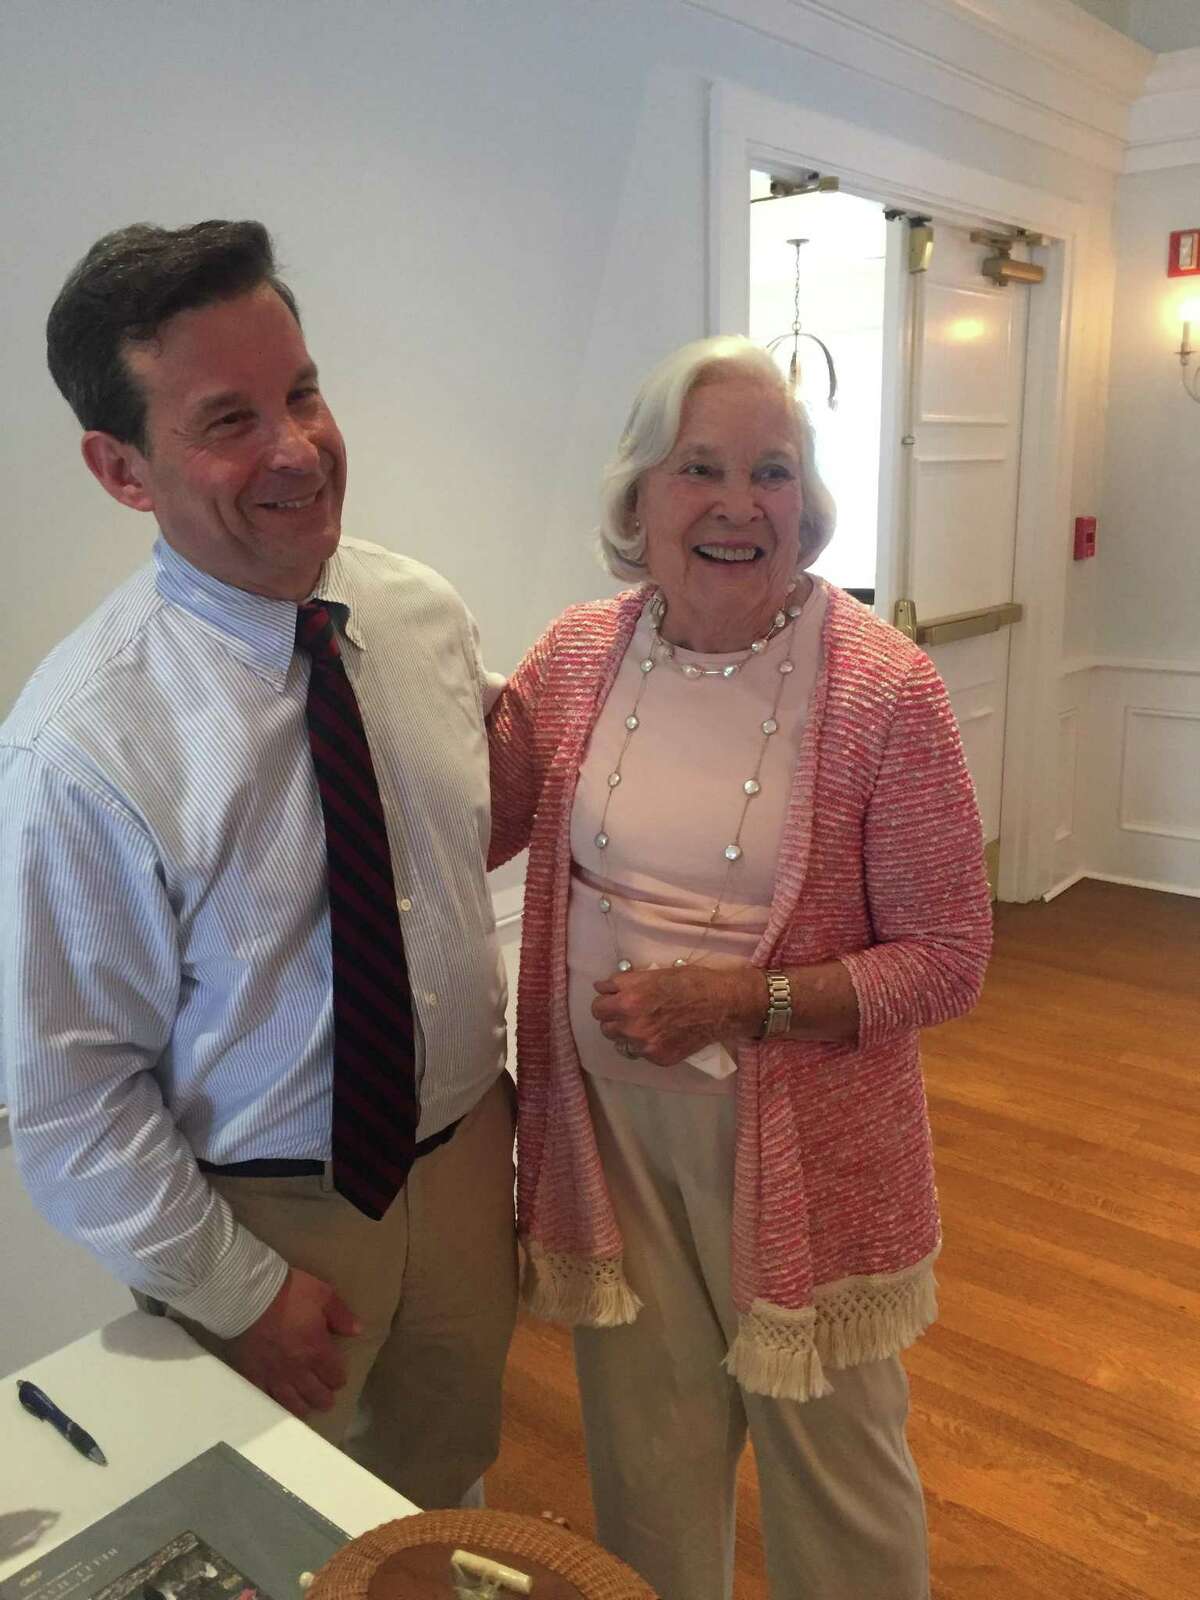 Greenwich resident and author Matt Bernard meets with Belle Haven resident Judy Higgins, his former neighbor, at a book signing to benefit Community Centers Inc. at the Belle Haven Club.